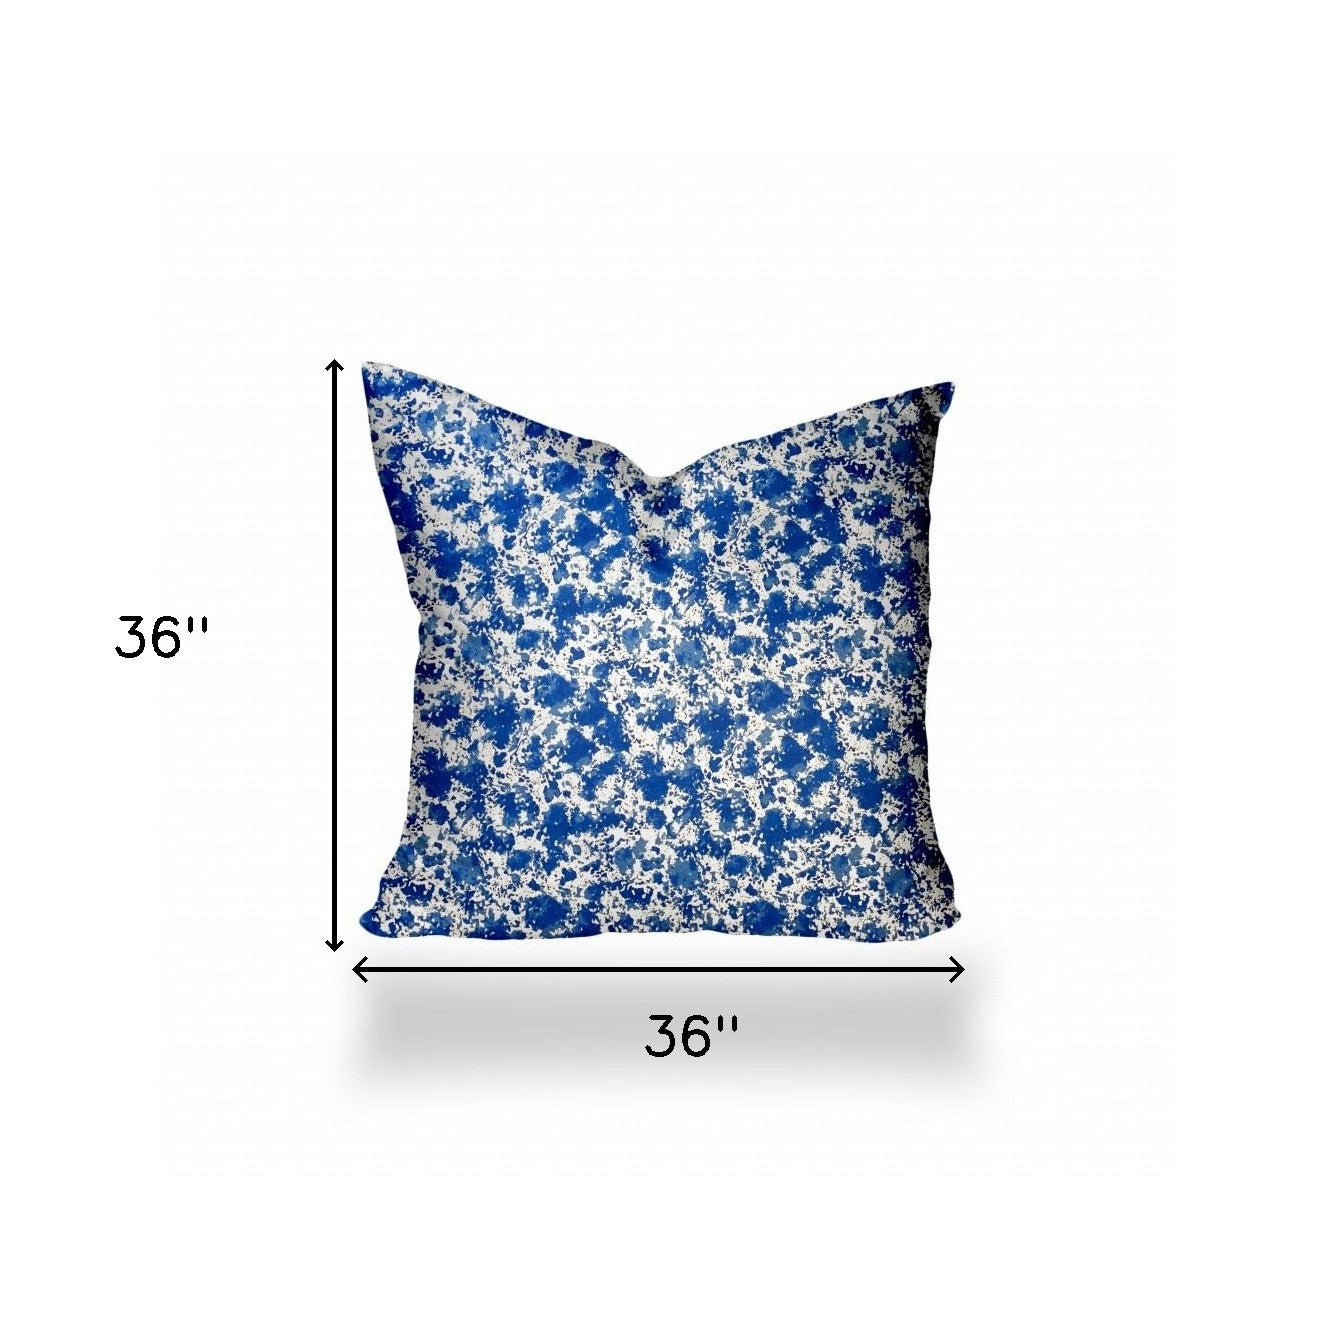 36" X 36" Blue And White Enveloped Coastal Throw Indoor Outdoor Pillow